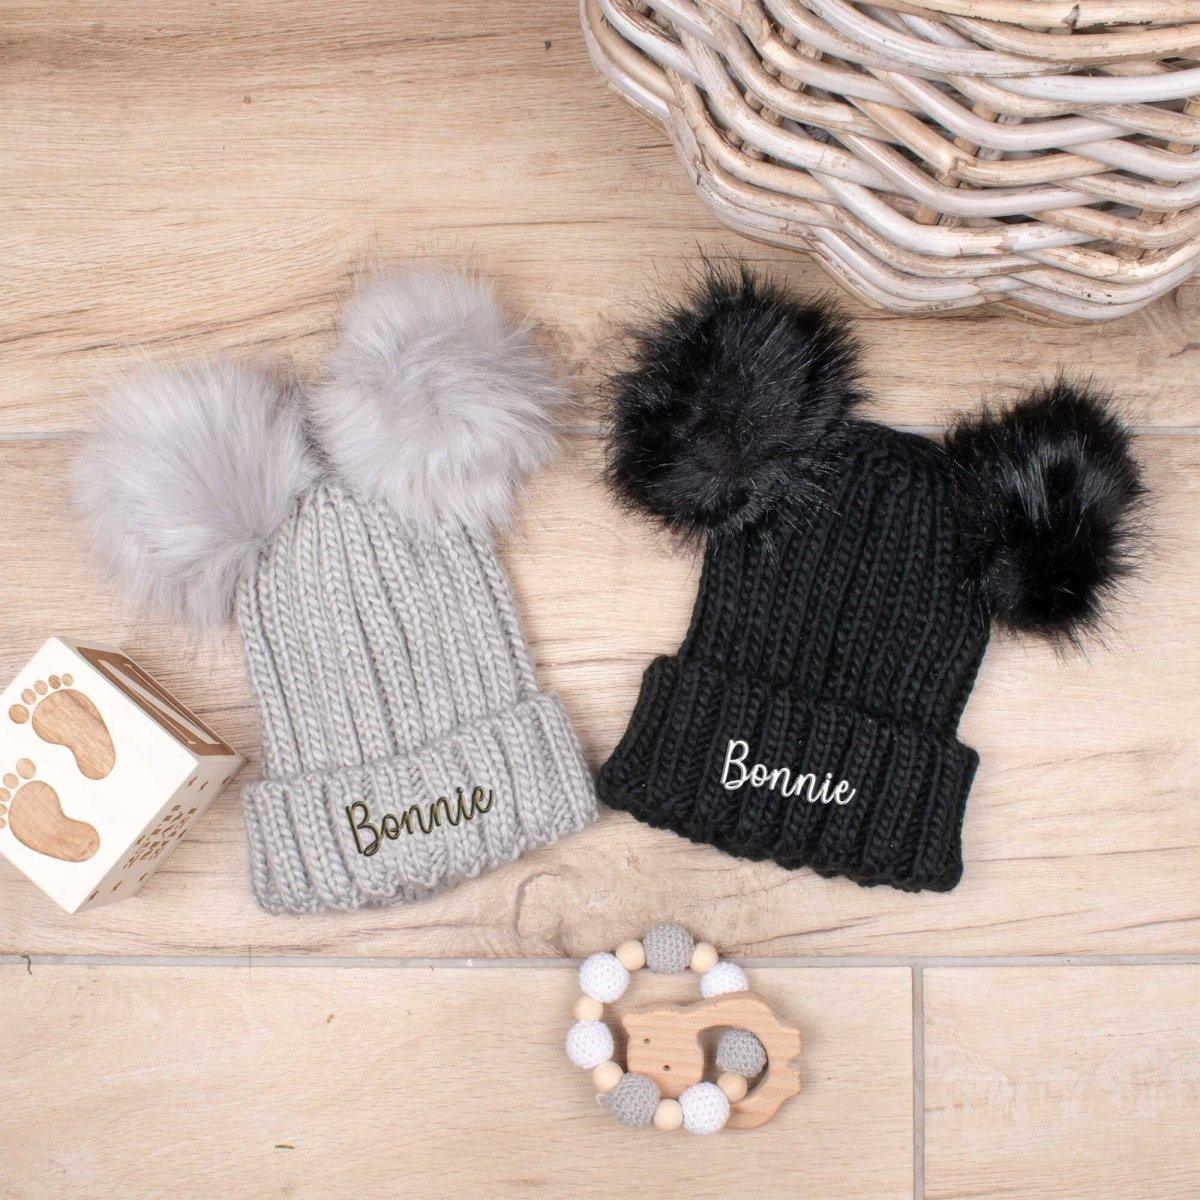 Personalised Baby Hat, Pom Pom Baby Hat, Baby Winter Hat, Embroidered Baby Hat, Baby Winter Hats, Custom Name Hat, Beanie Hat